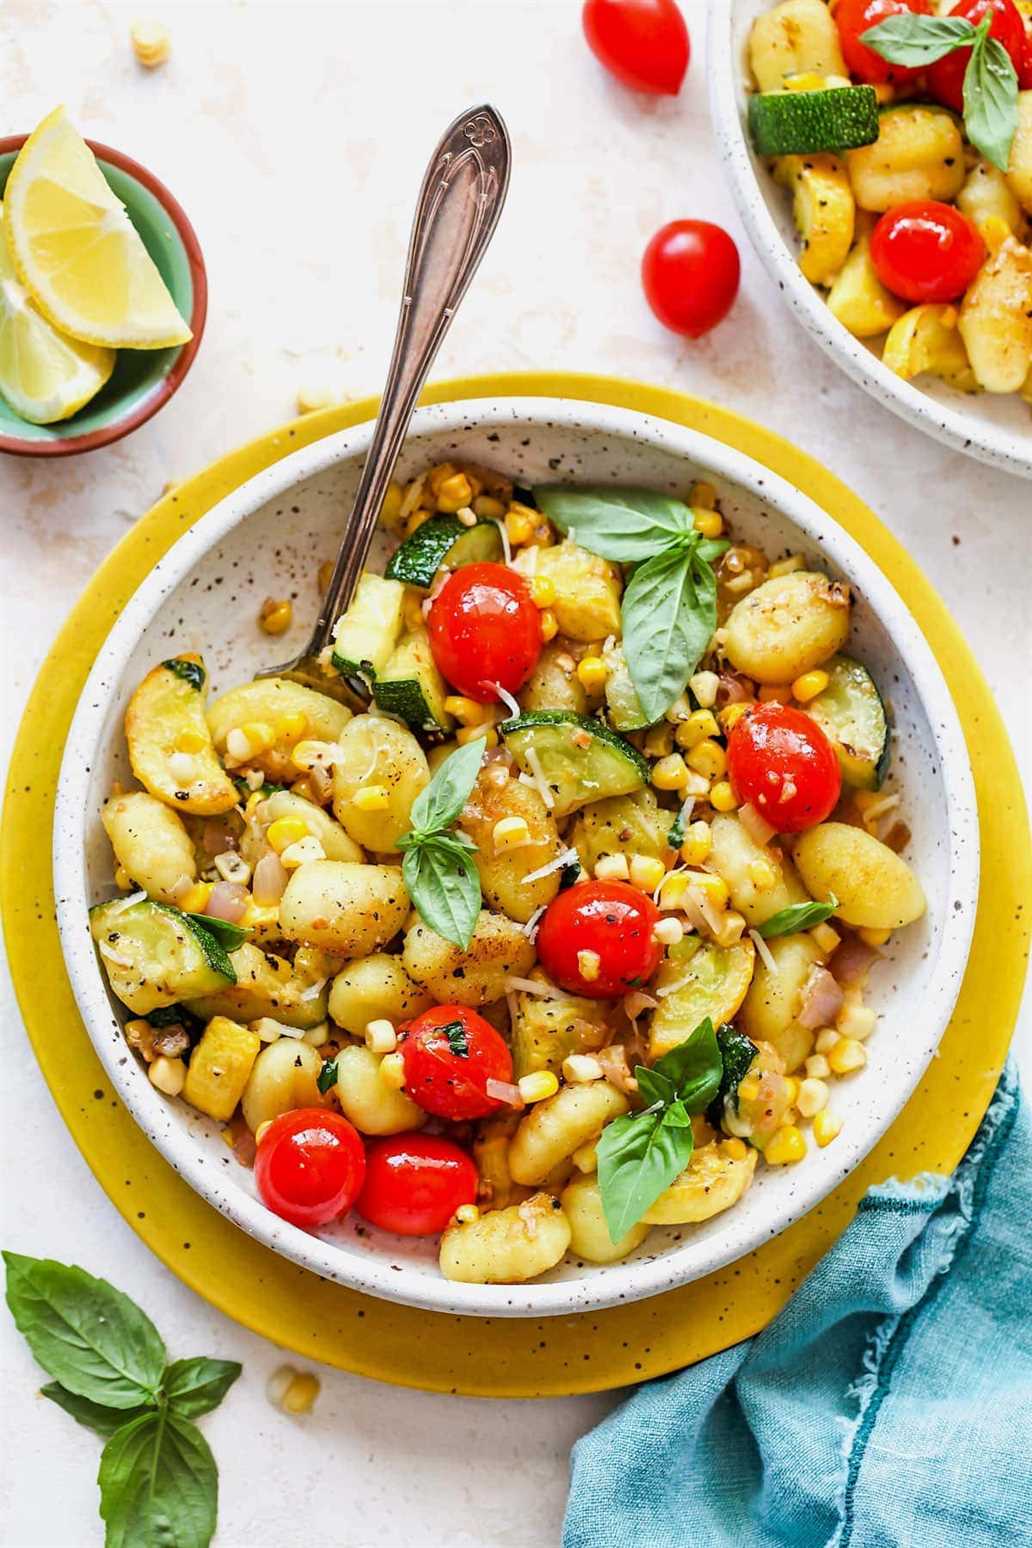 Butter Parmesan Gnocchi with squash, corn, and tomatoes in bowl with spoon